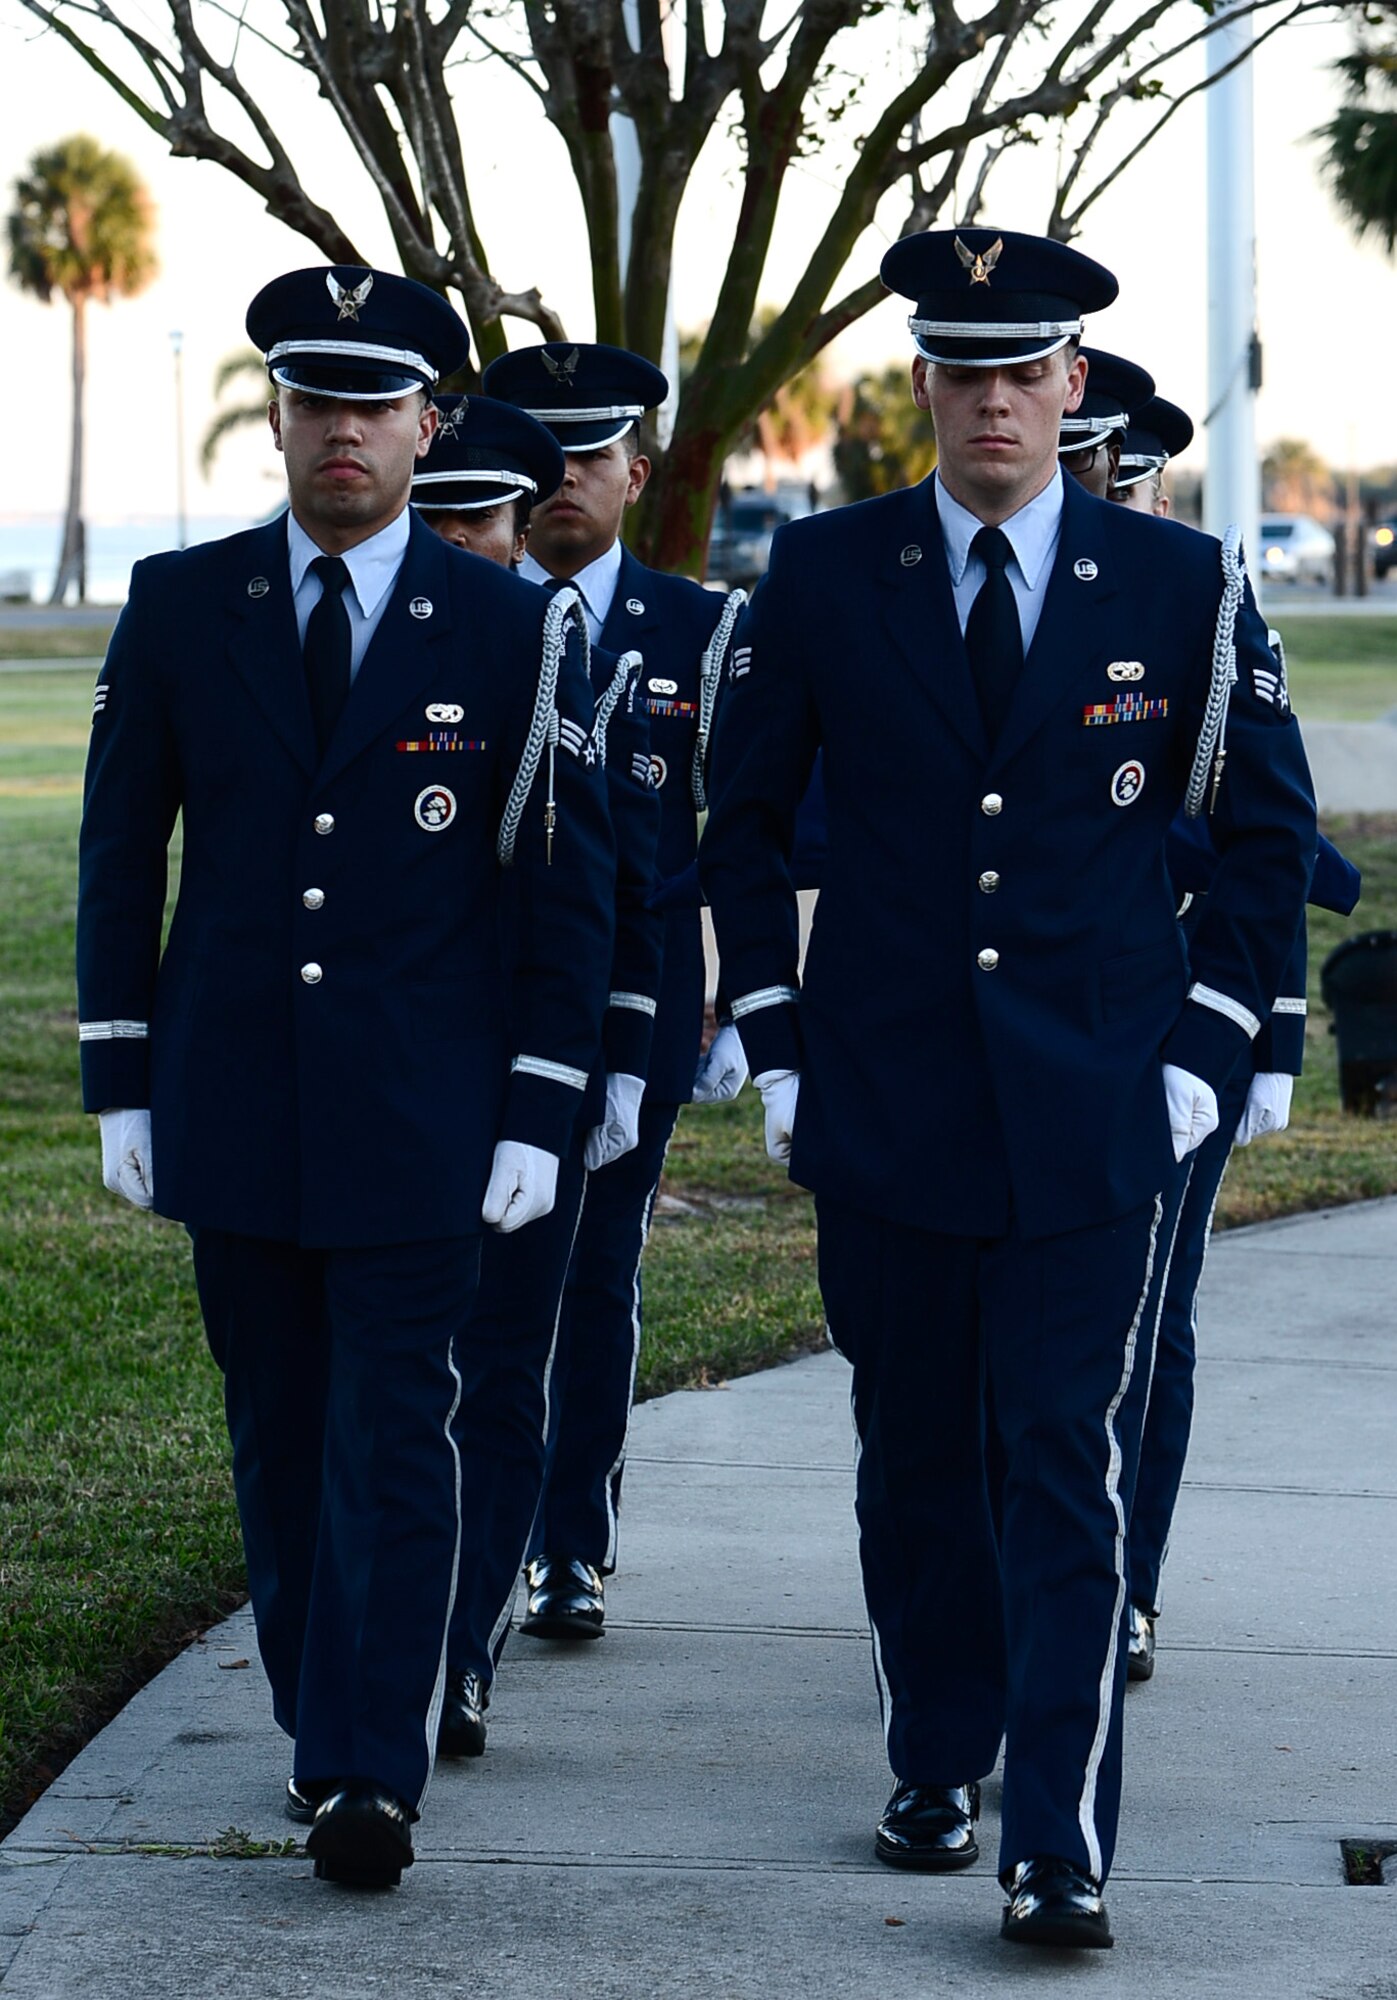 Members from MacDill Air Force Base, Fla., honor guard secure the American flag during a Veterans Day Ceremony at MacDill Air Force Base, Fla., Nov. 10, 2016. Veterans Day is observed annually on November 11 to honor military veterans who have served in the U.S. Armed Forces. (U.S. Air Force photo by Senior Airman Tori Schulz)